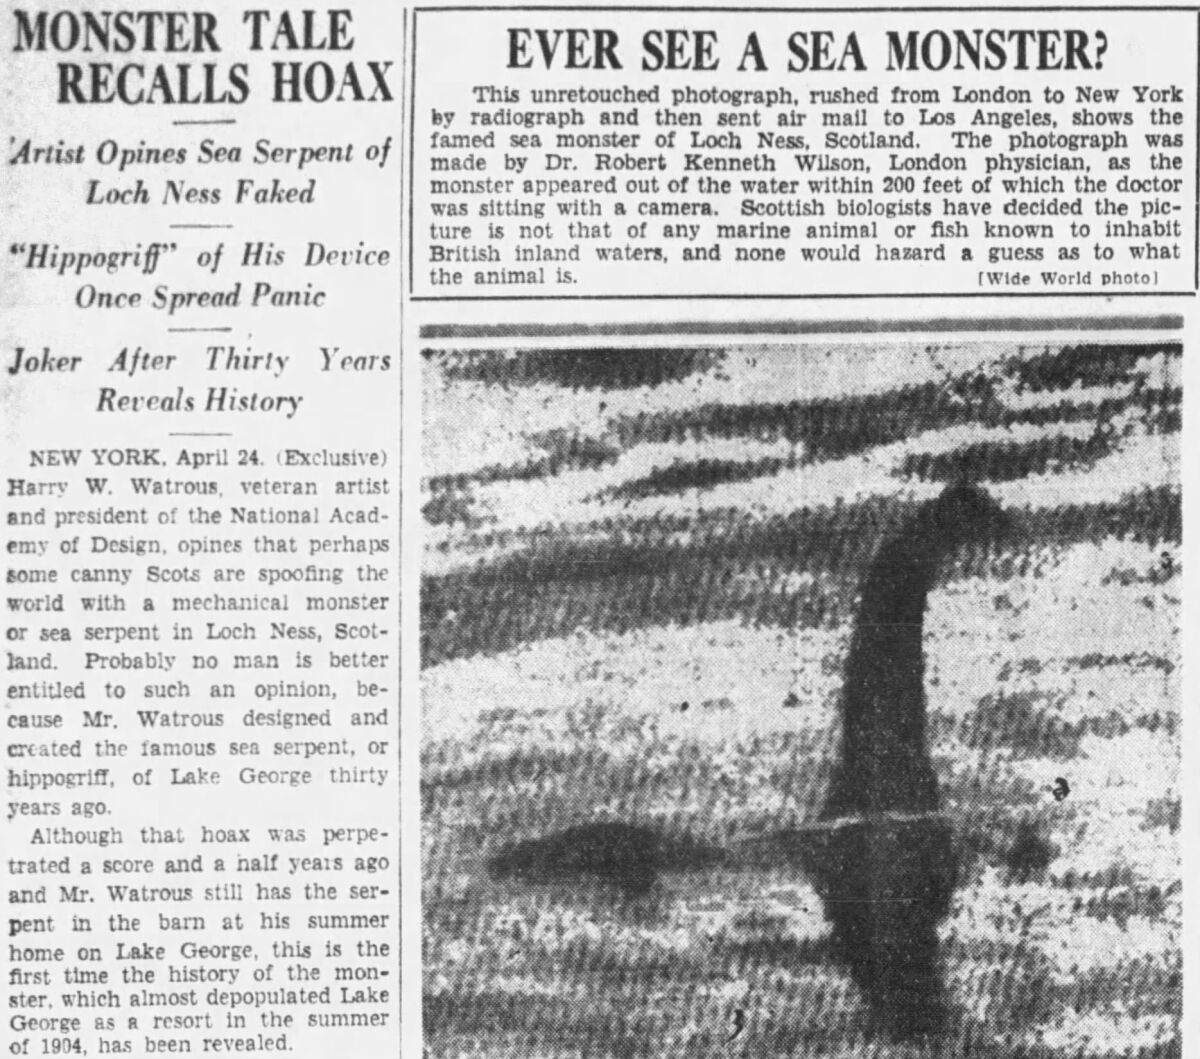 A clipping from a newspaper shows a grainy photo of something protruding from water.